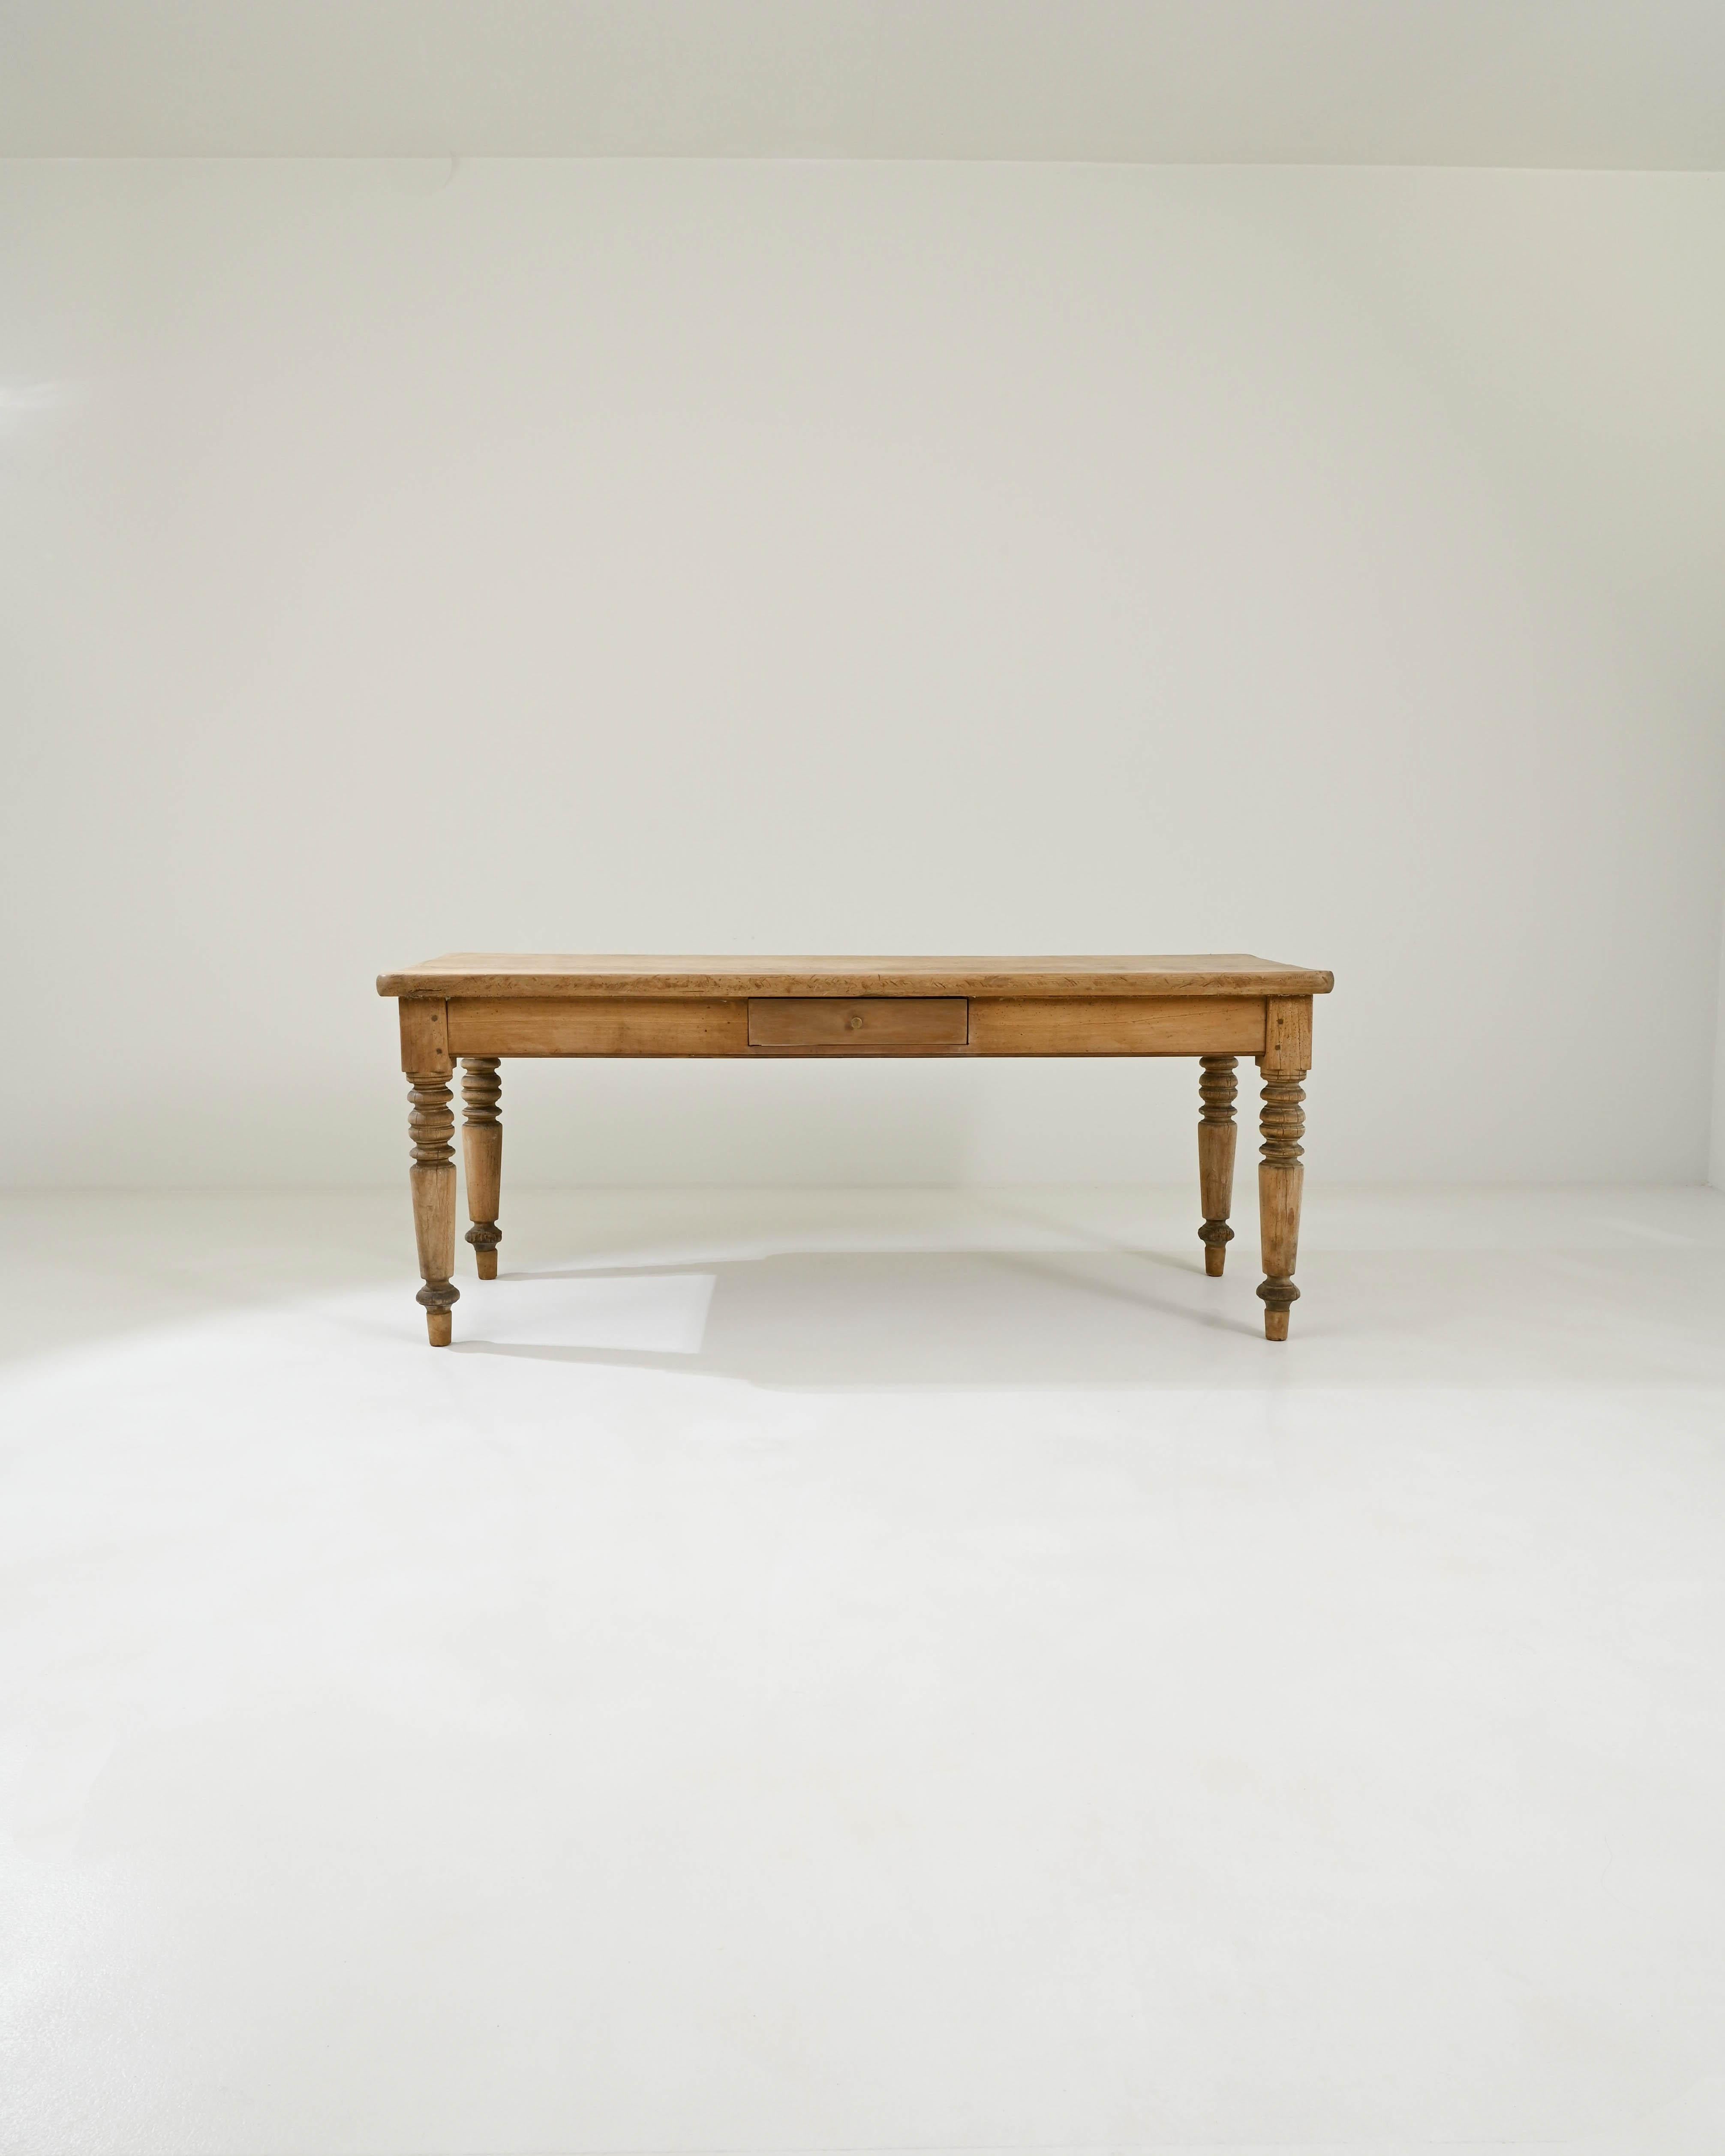 A wooden dining table created in France circa 1900. Minimal and understated, but expertly crafted, this unassuming and pleasant dining table emits a cheery home-warming glow. With carefully lathed legs, precise mortise and tenon joinery, and the